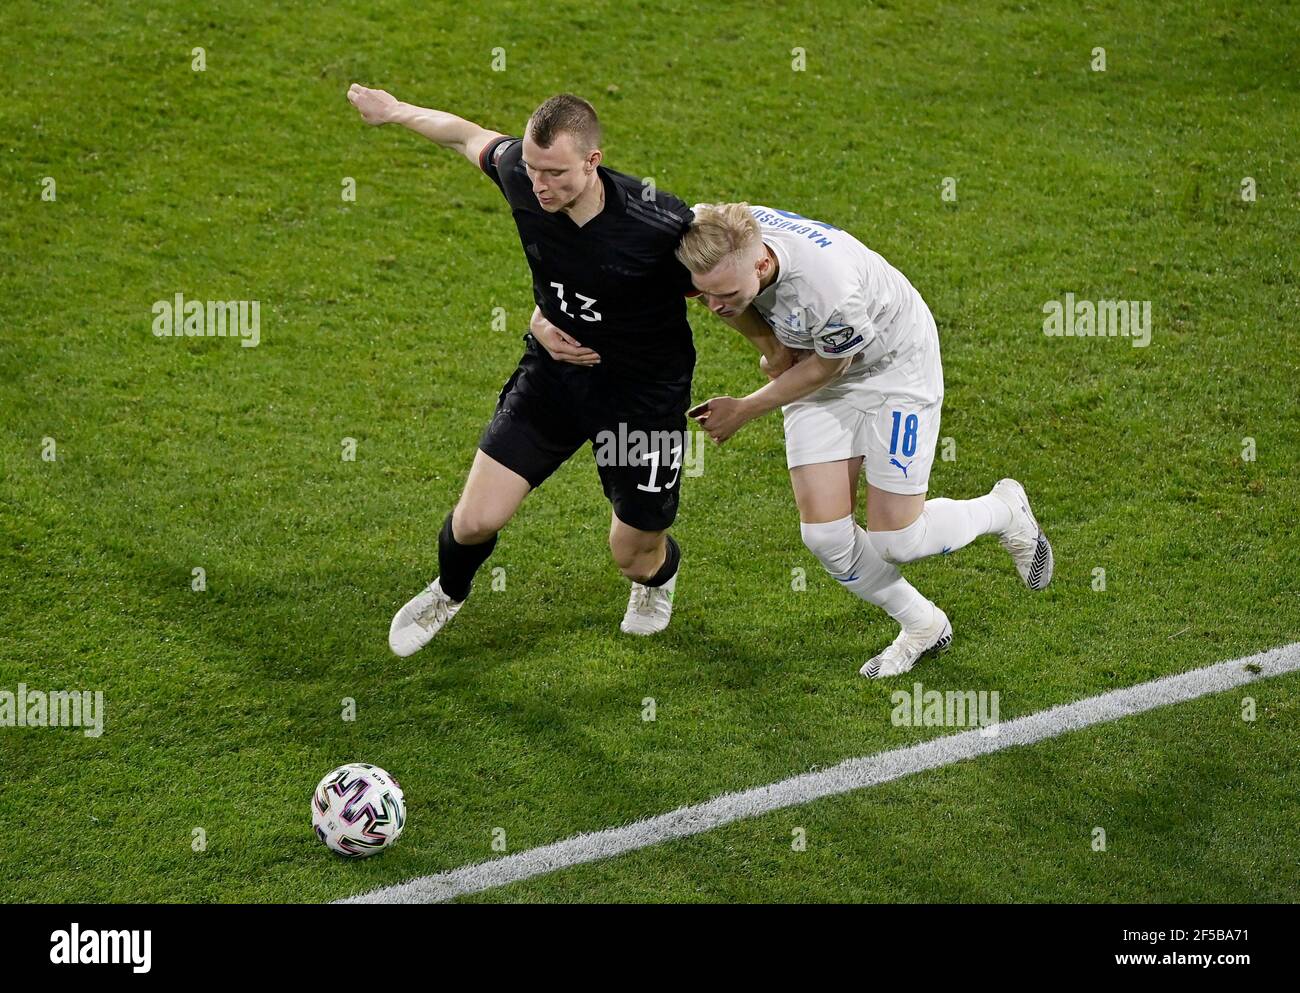 Soccer Football - World Cup Qualifiers Europe - Group J - Germany v Iceland - MSV-Arena, Duisburg, Germany - March 25, 2021 Germany's Lukas Klostermann in action with Iceland's Hordur Magnusson Pool via REUTERS/Tobias Schwarz Stock Photo